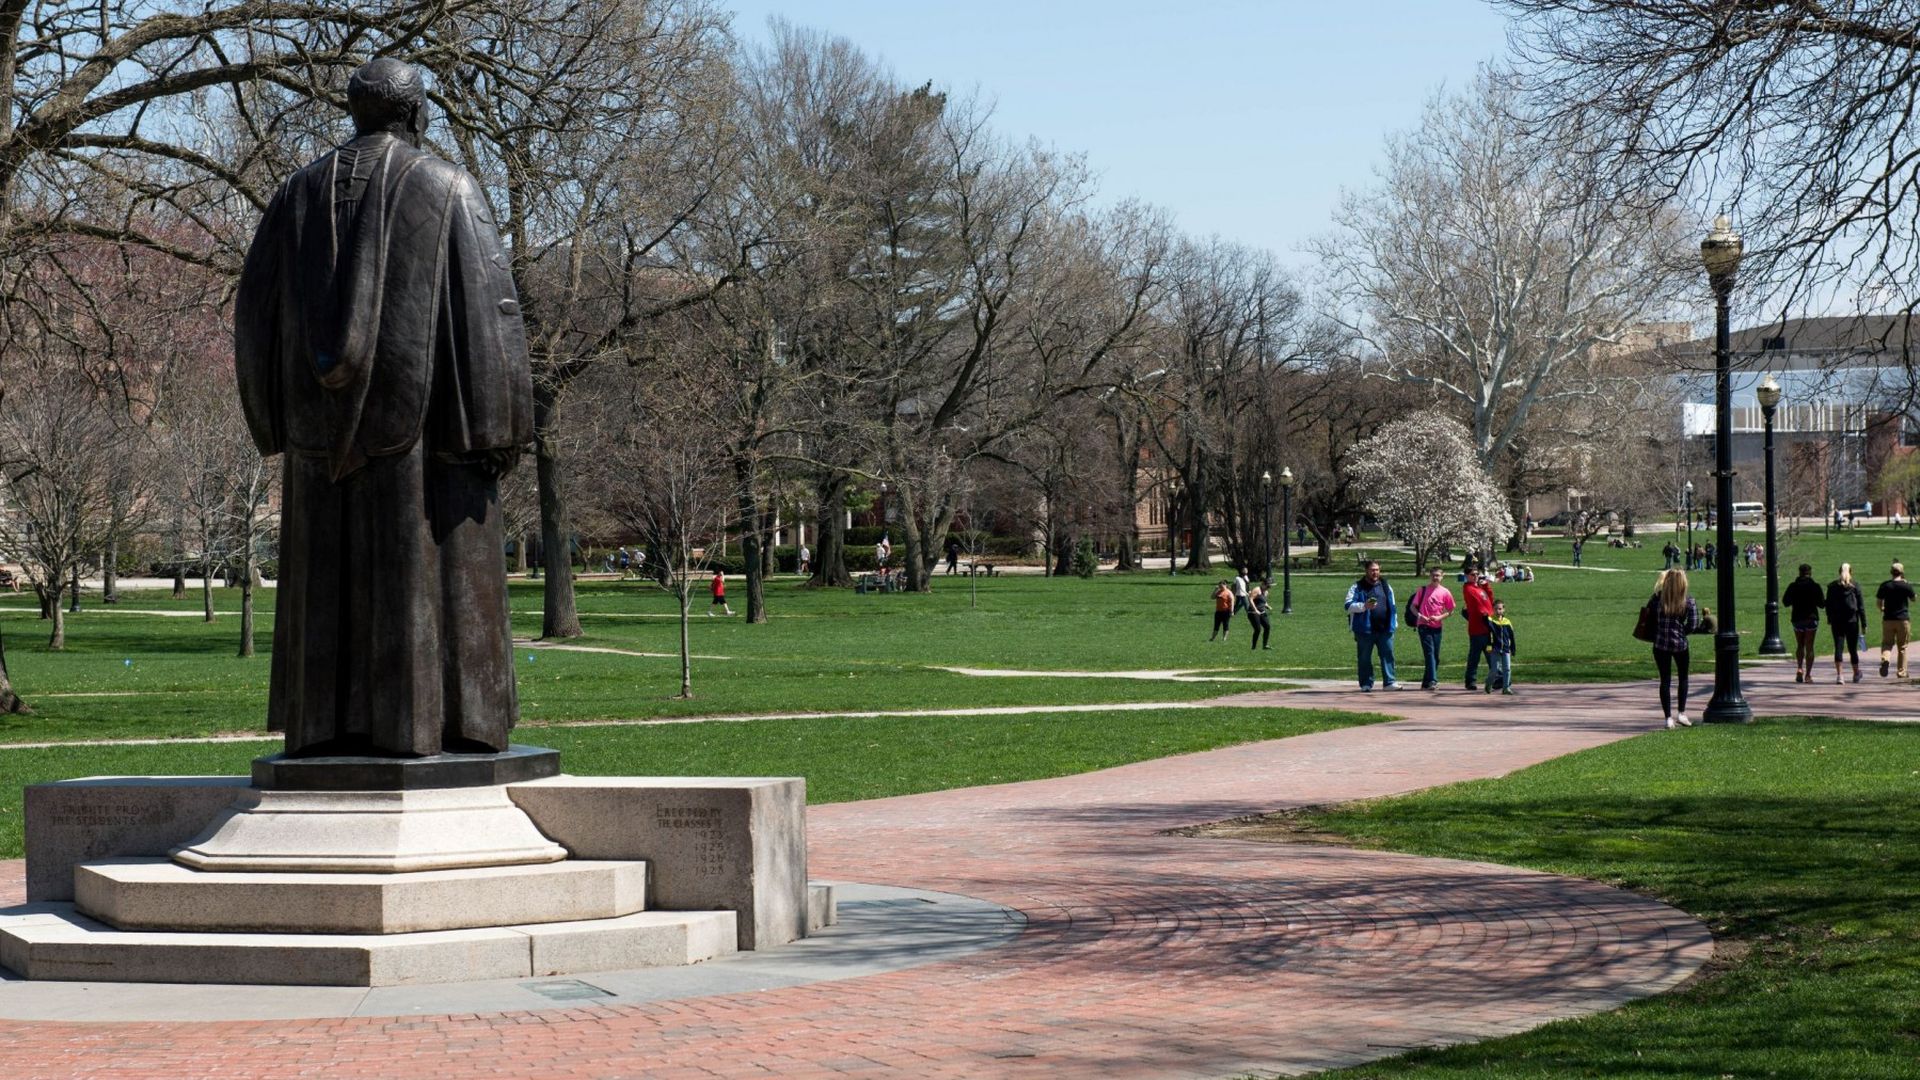 Students walk across the Ohio State University oval, near a statue of past OSU president William Oxley Thompson